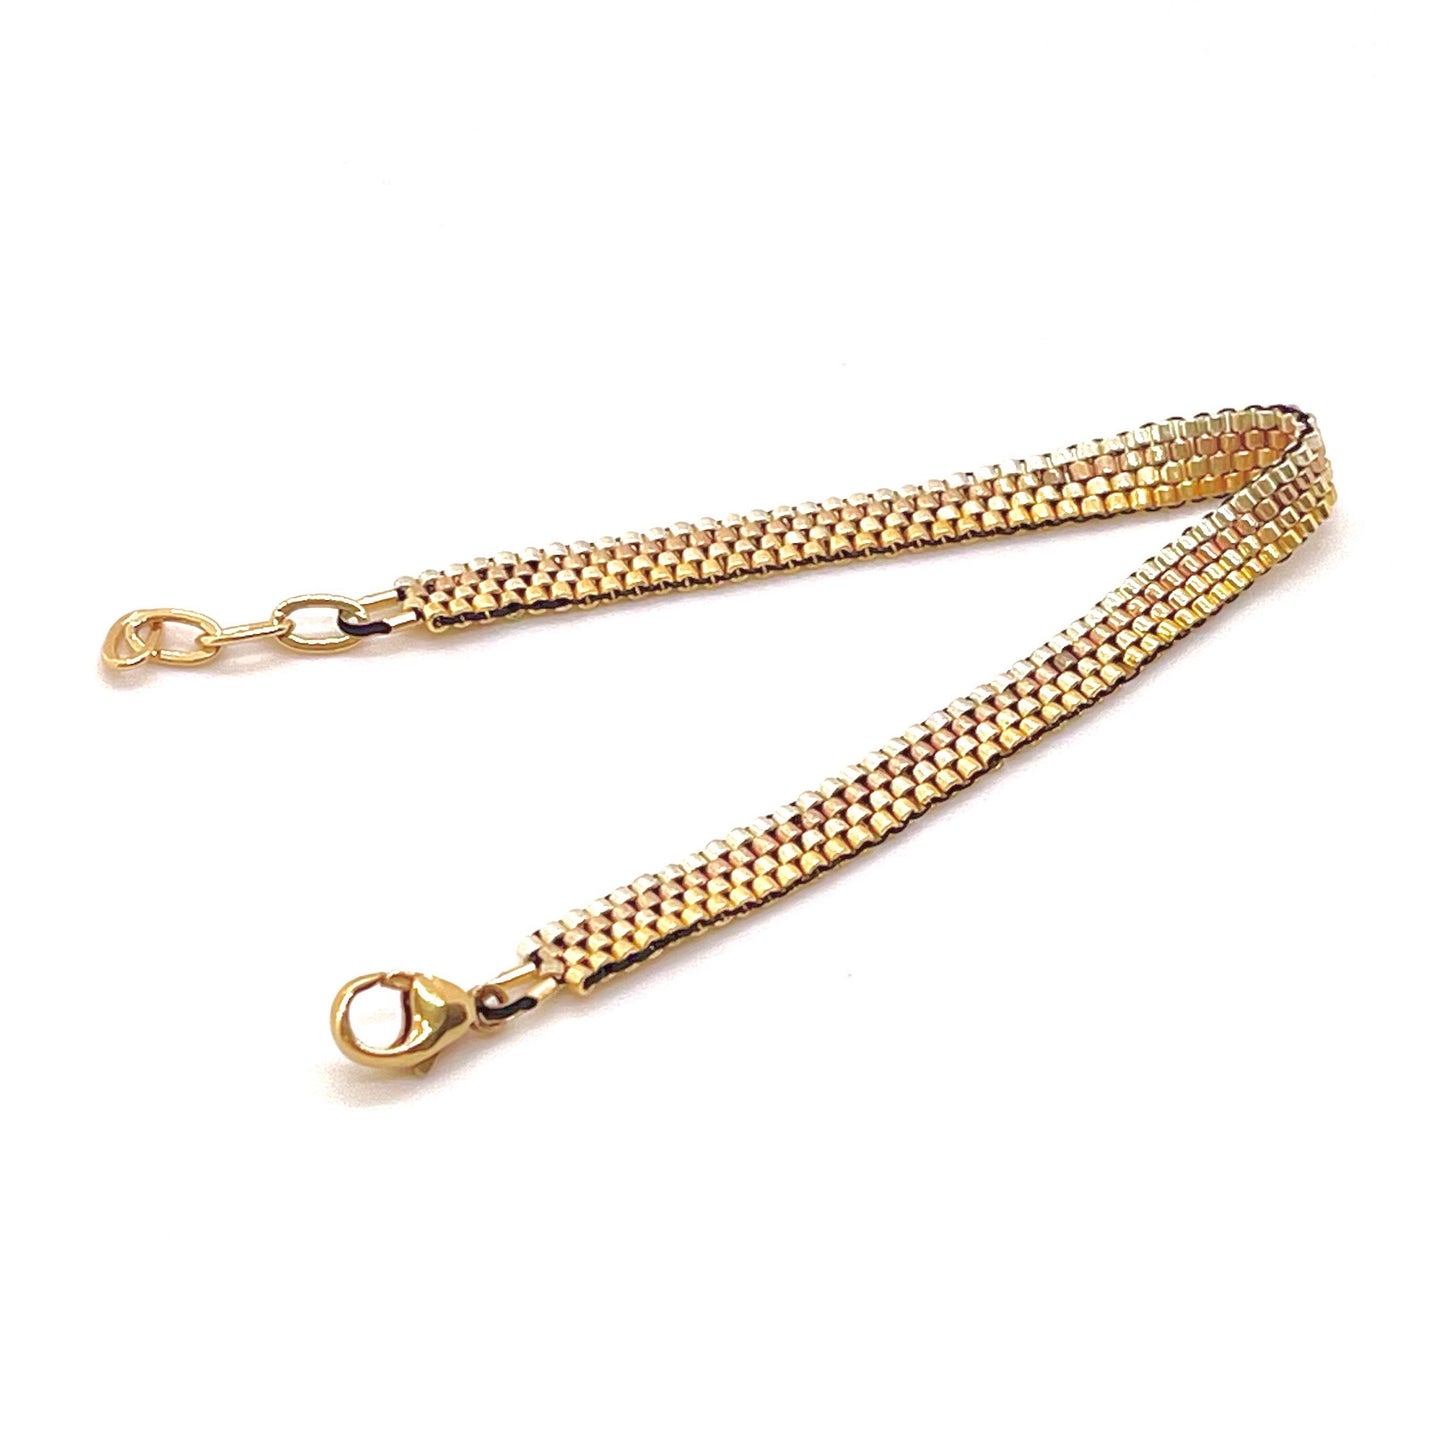 Horizontal stripes gold tone metal bead woven bracelet with seed beads and a gold filled clasp.